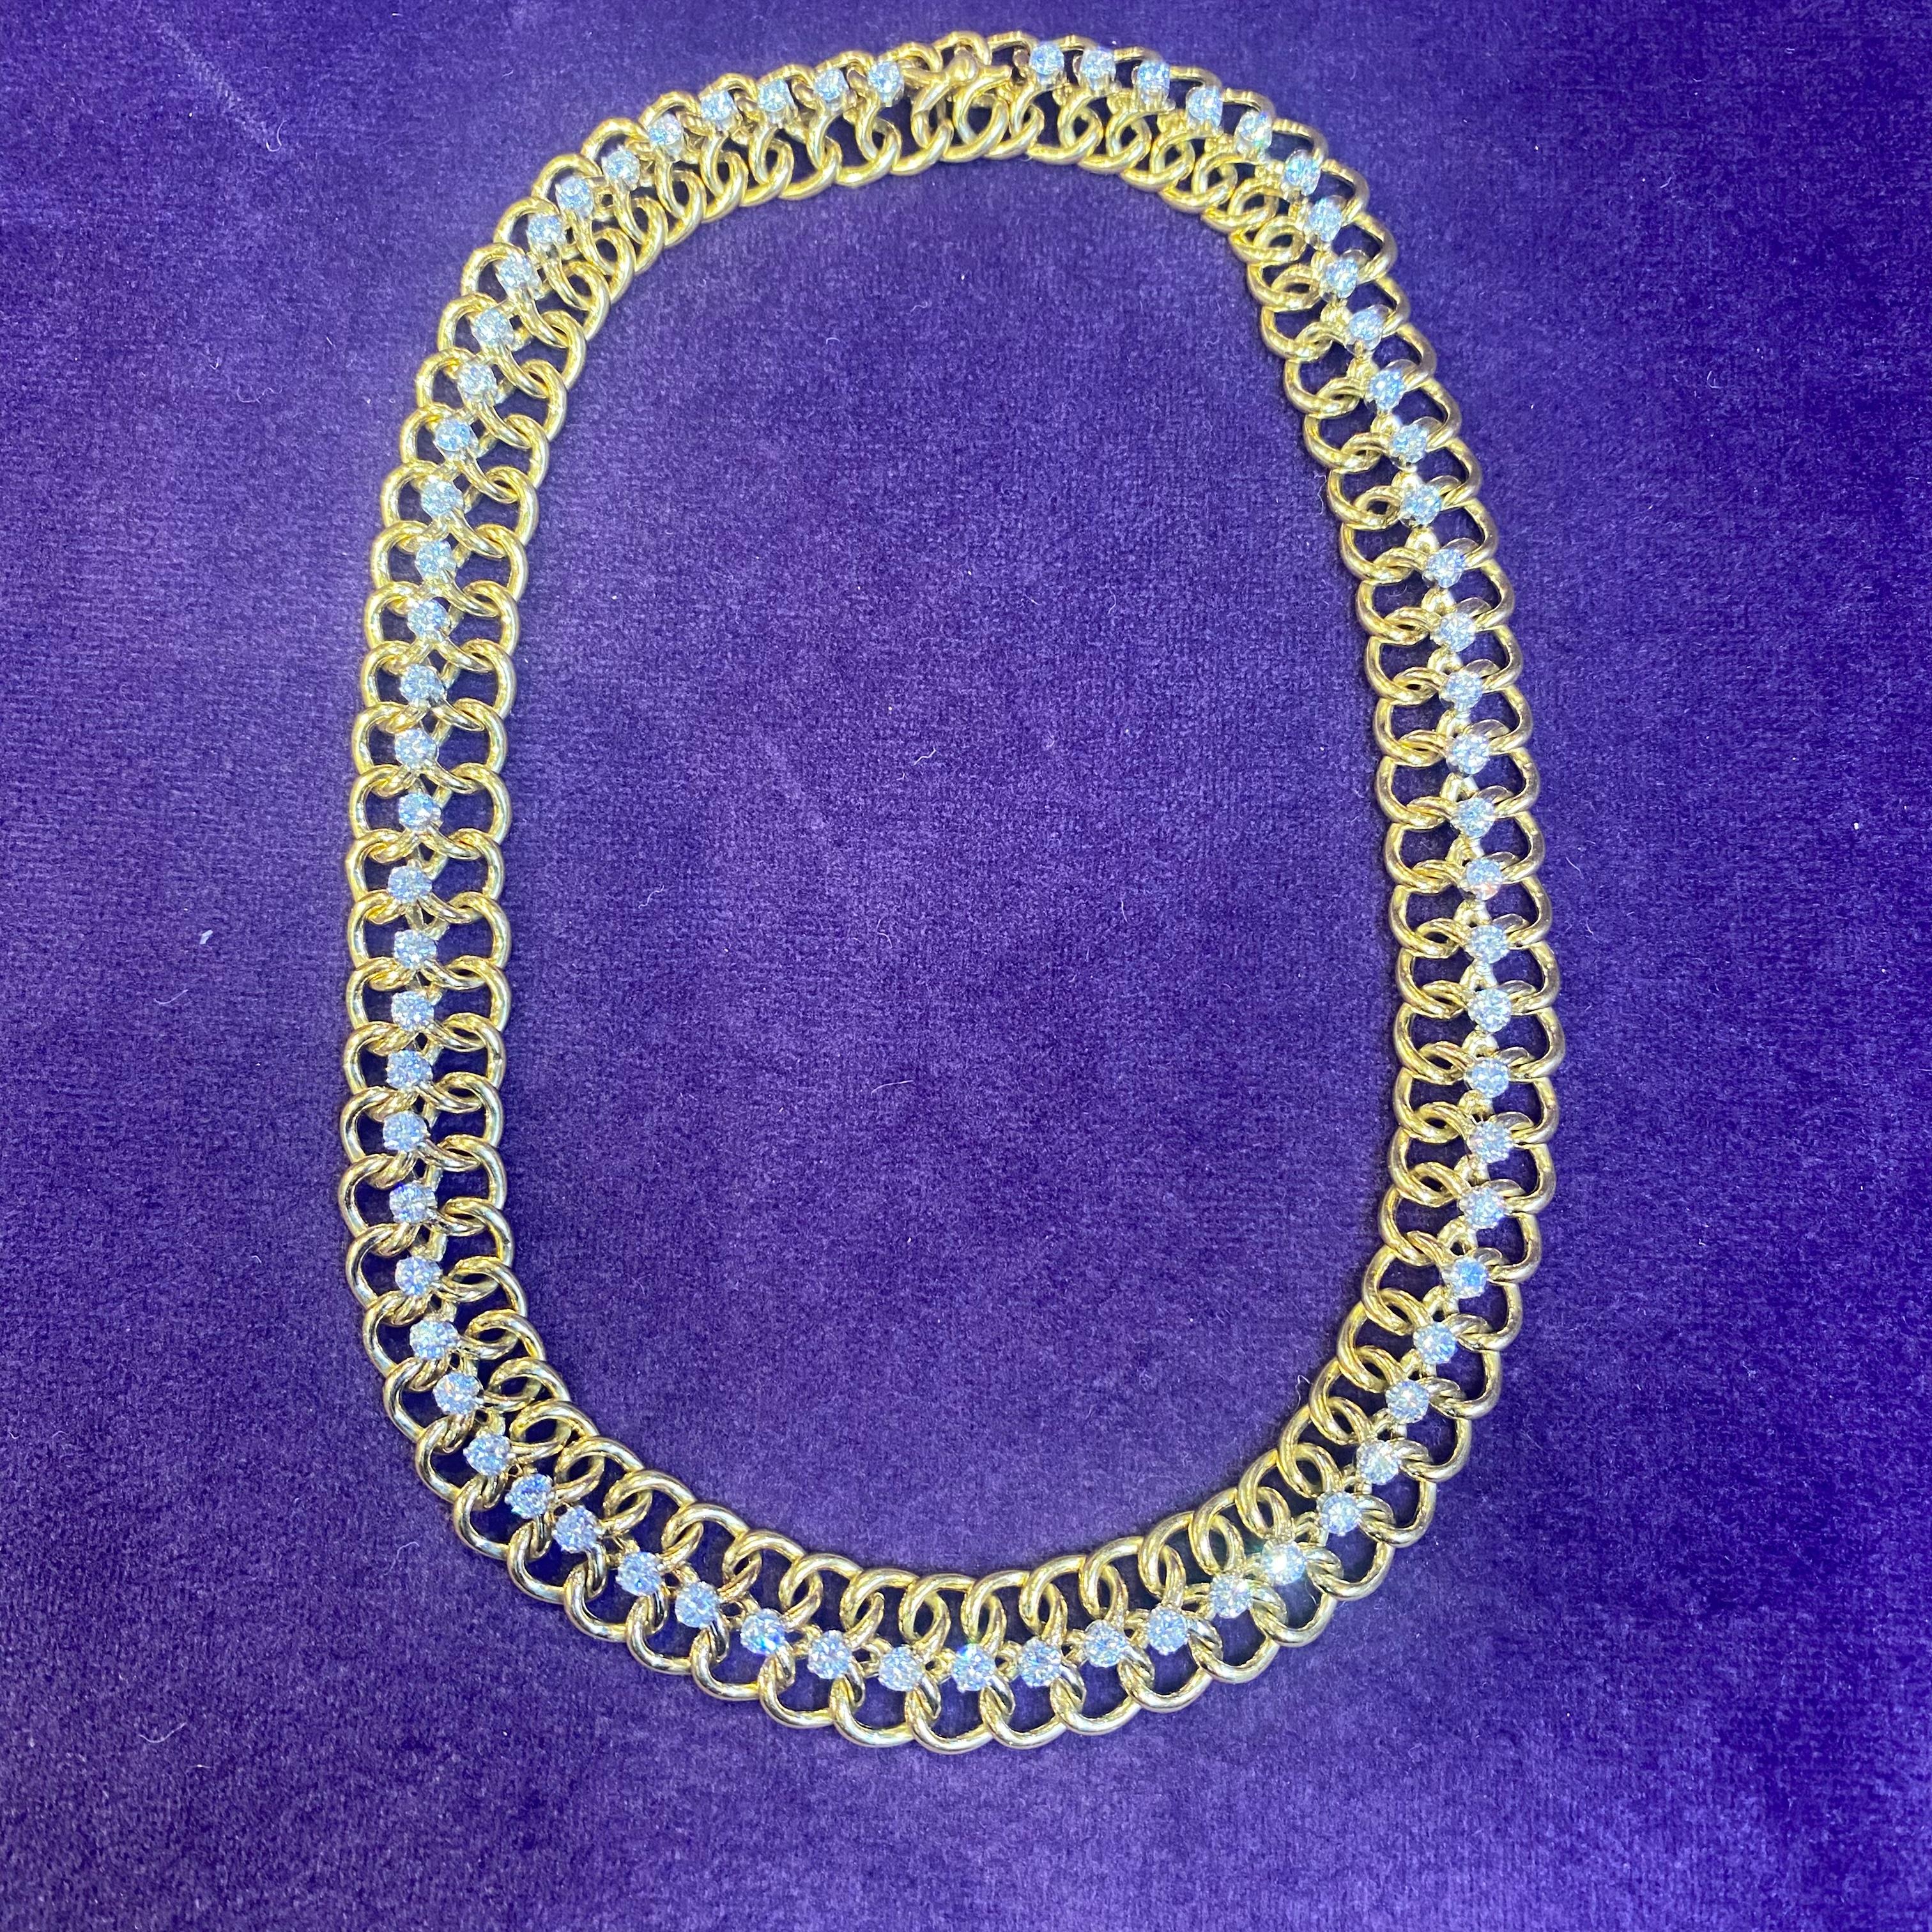 Van Cleef & Arpels Gold & Diamond Necklace In Excellent Condition For Sale In New York, NY